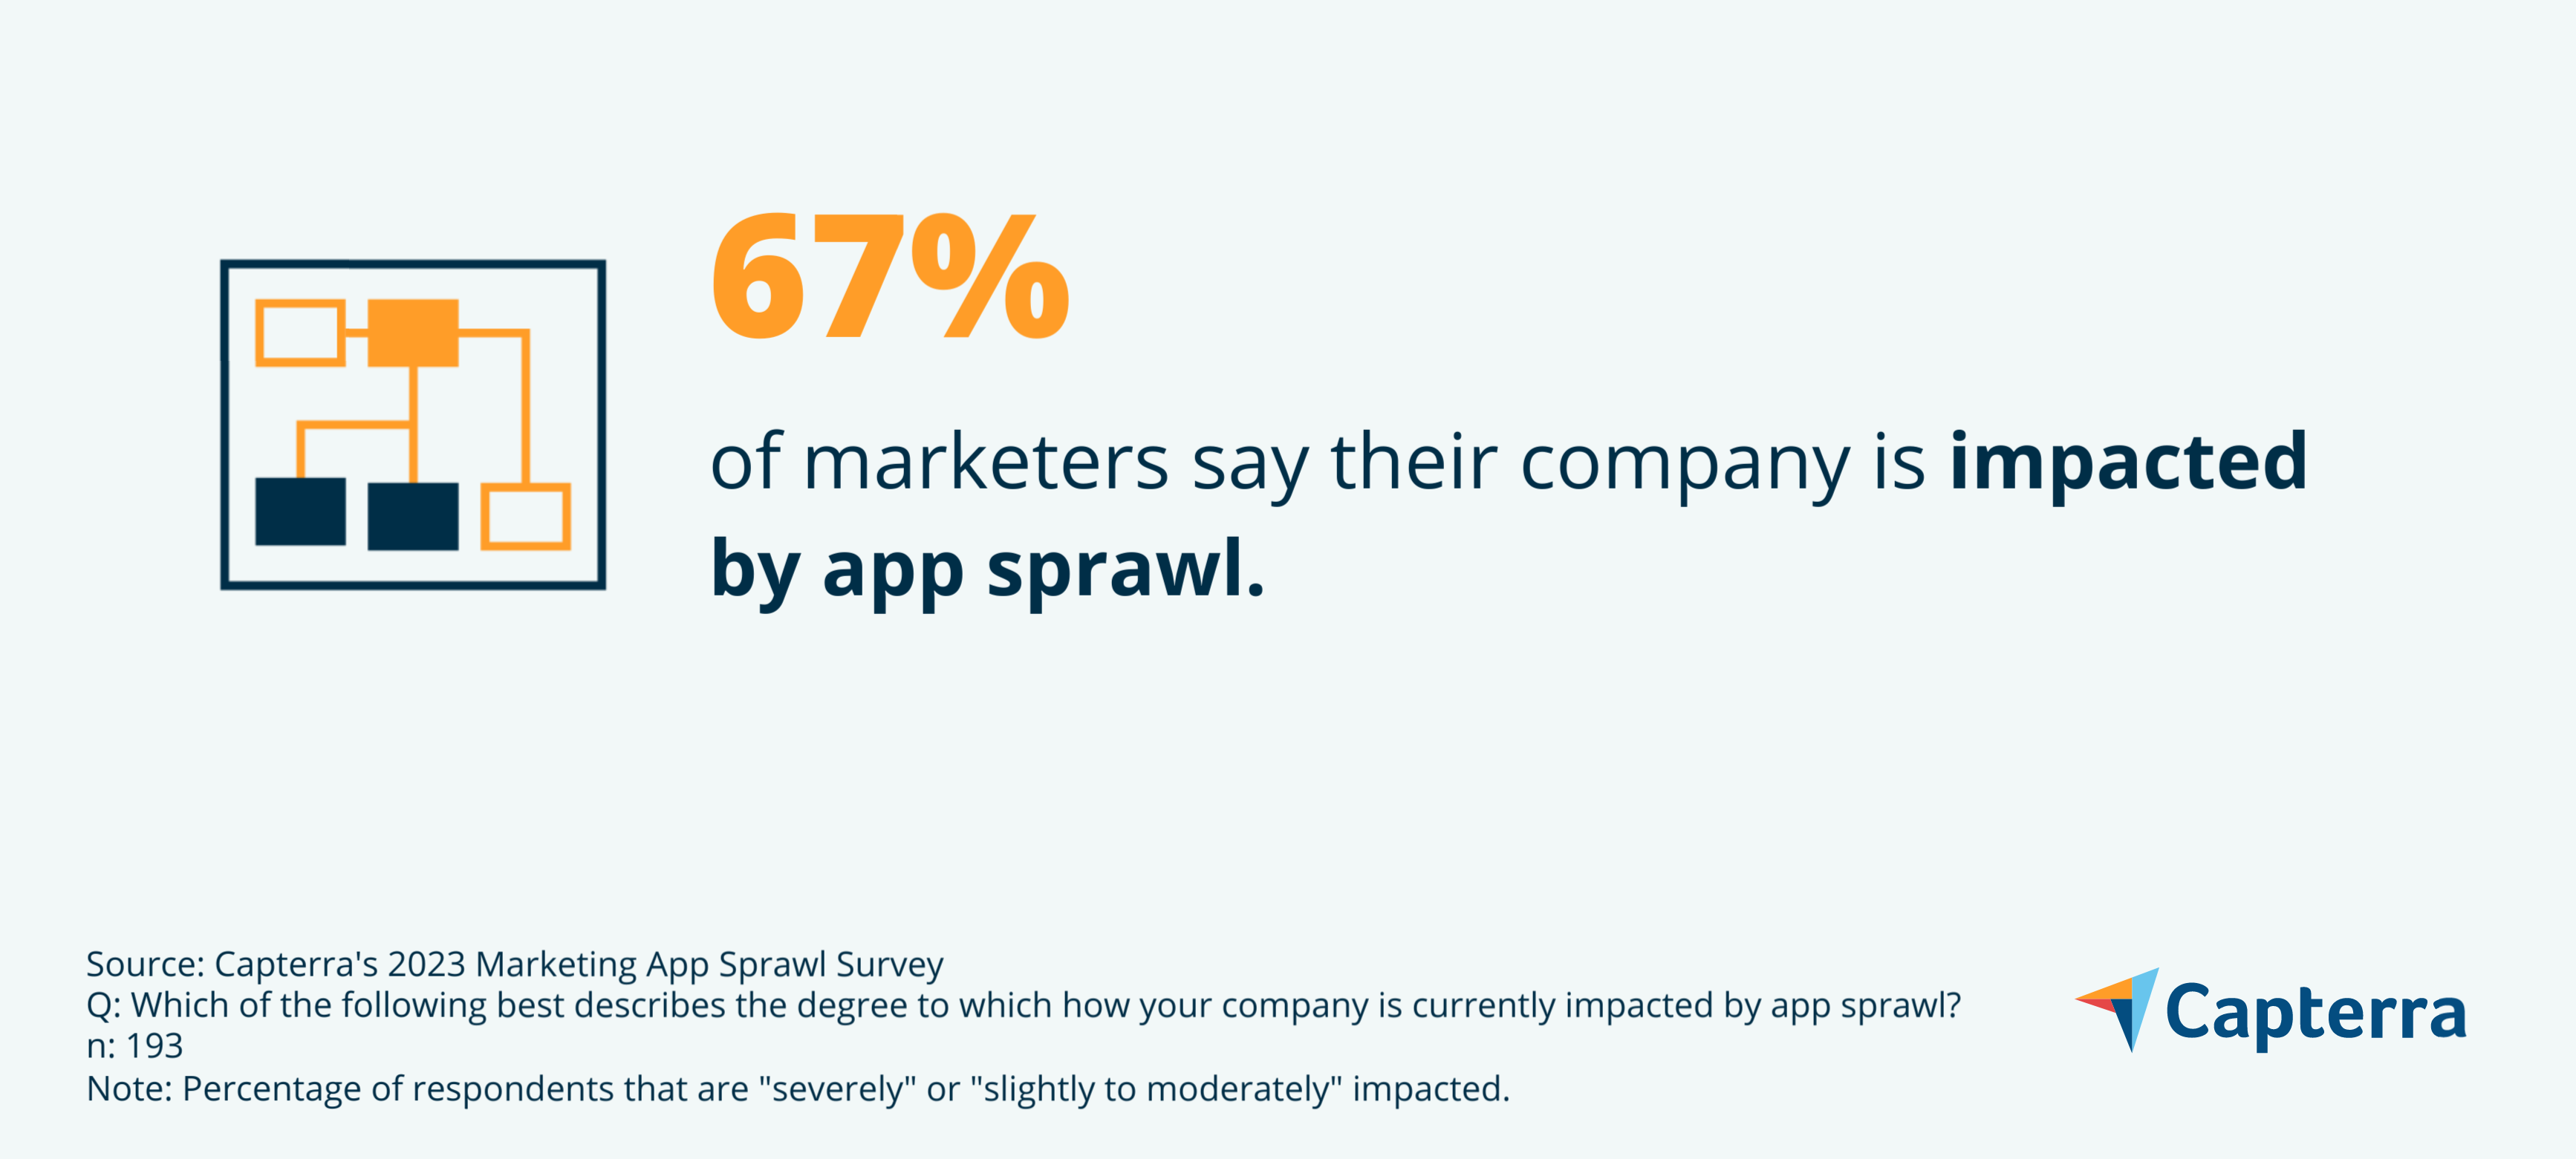 App sprawl impact graphic for the blog article "Marketing App Sprawl is Wasting Time and Money. Here’s How to Fix It"